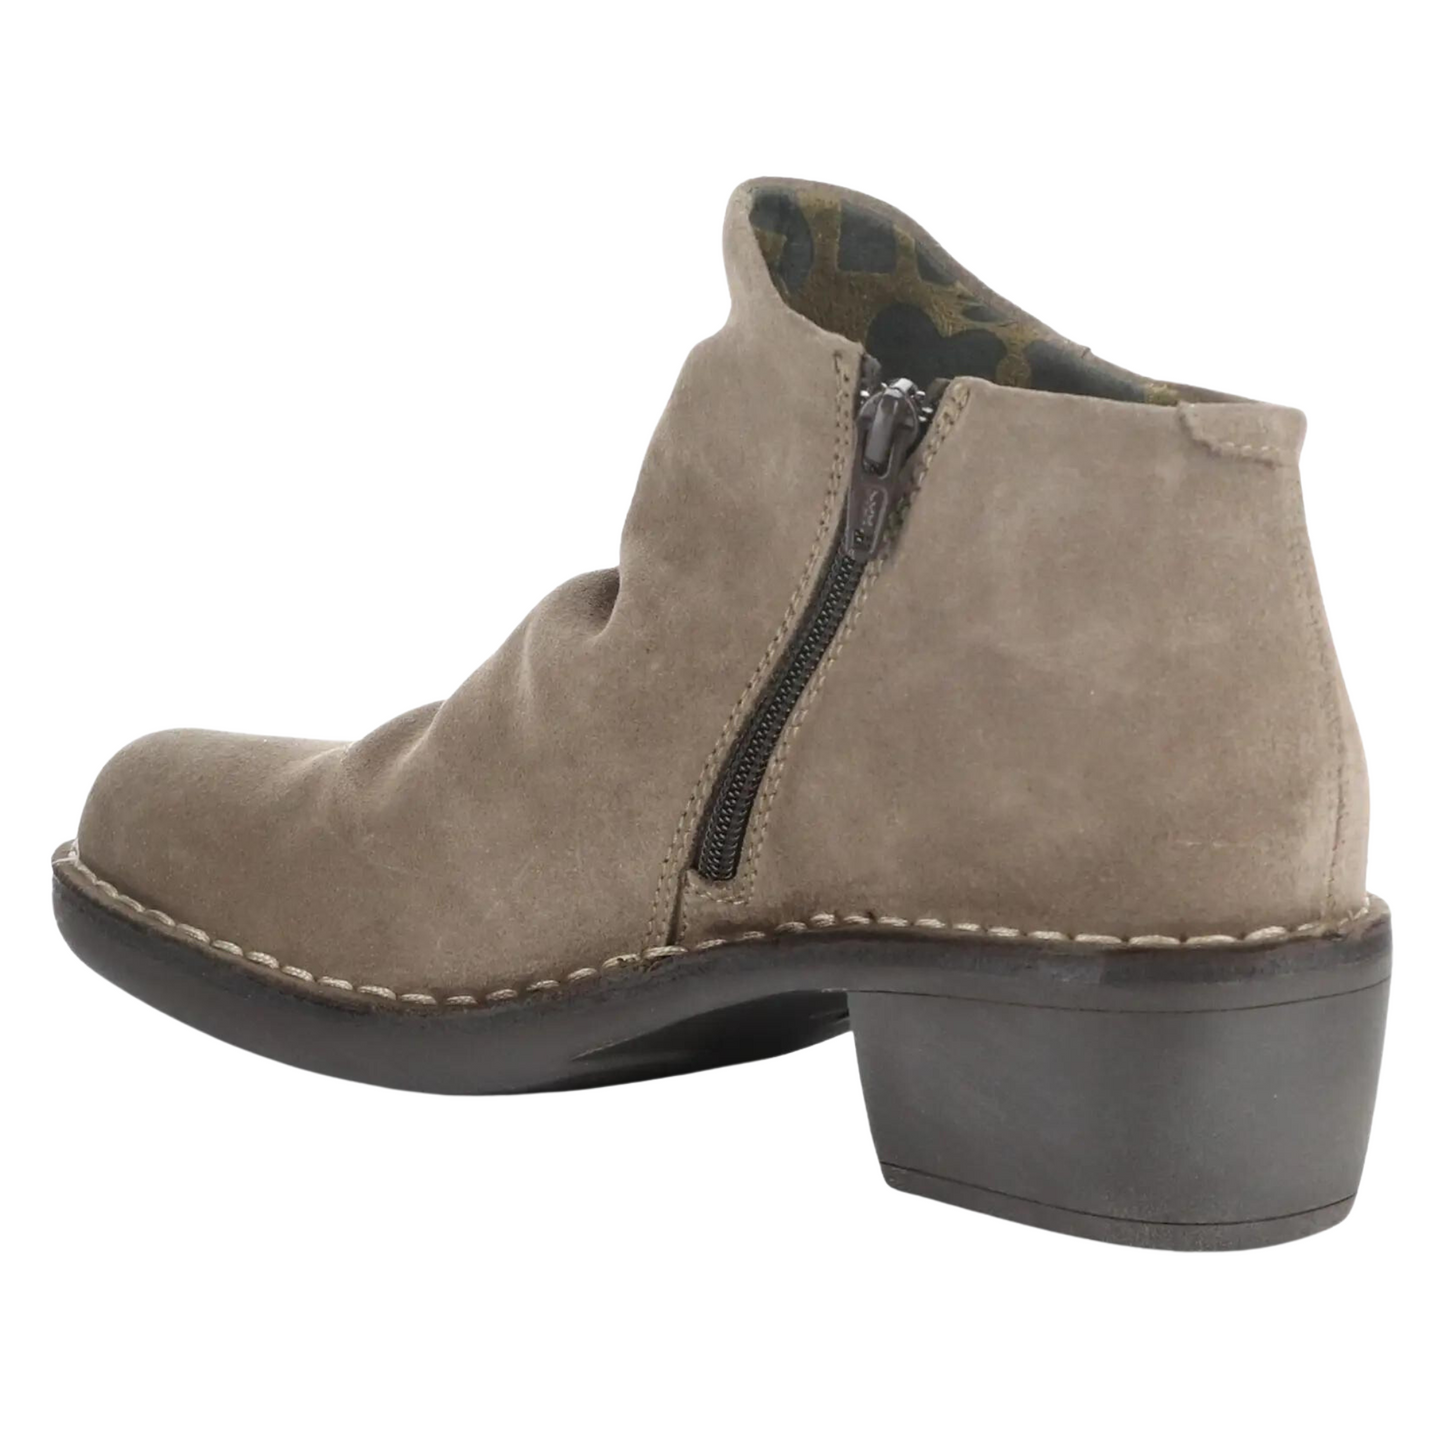 Rear angled profile of the Fly London Merk Boot in the colour Taupe.